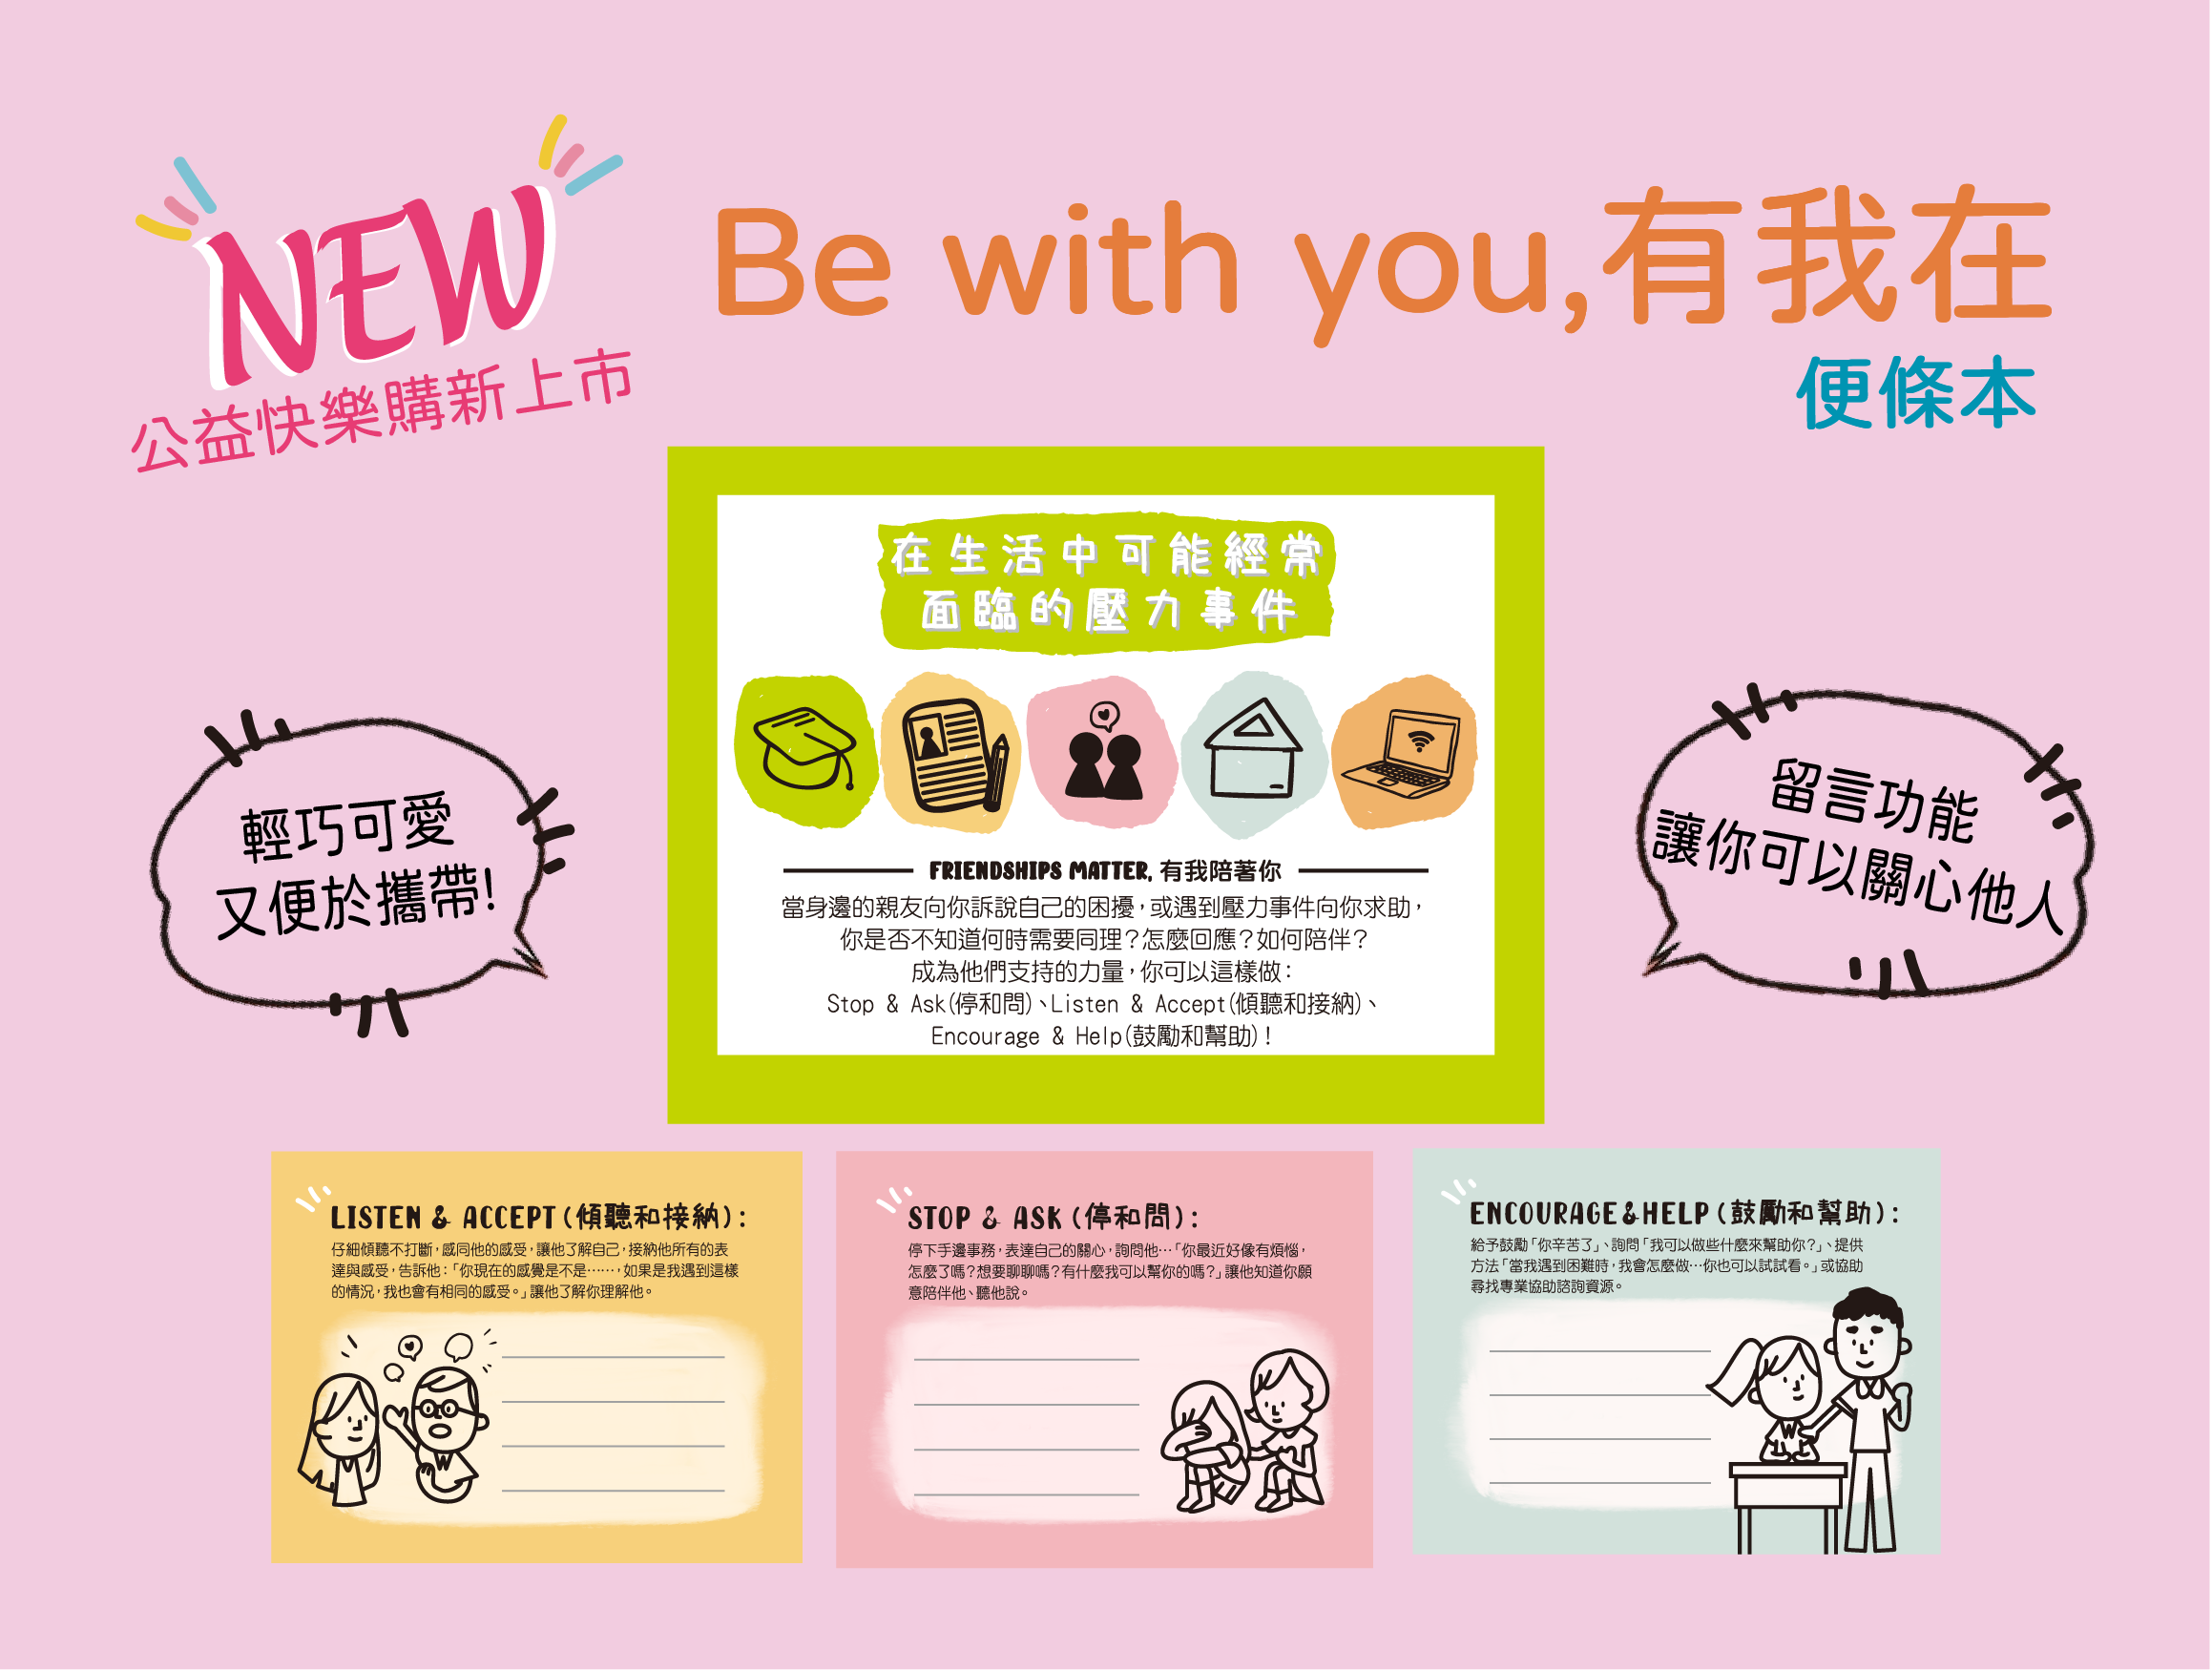 「Be with You，有我在」便條本，全新上市